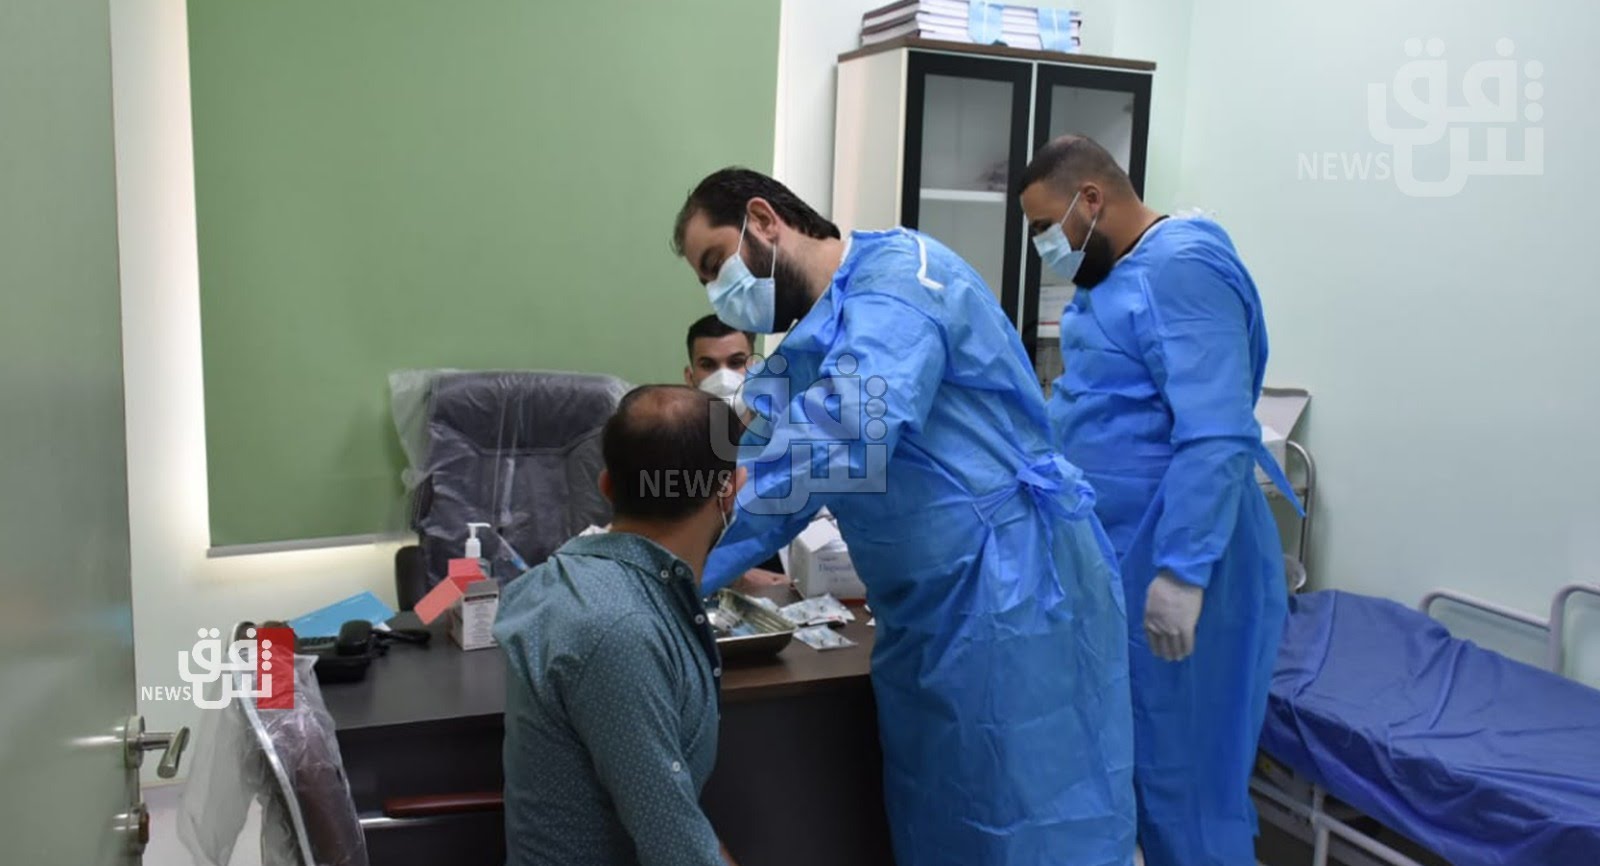 COVID-19: +550 new cases and 14 mortalities in Iraq today 